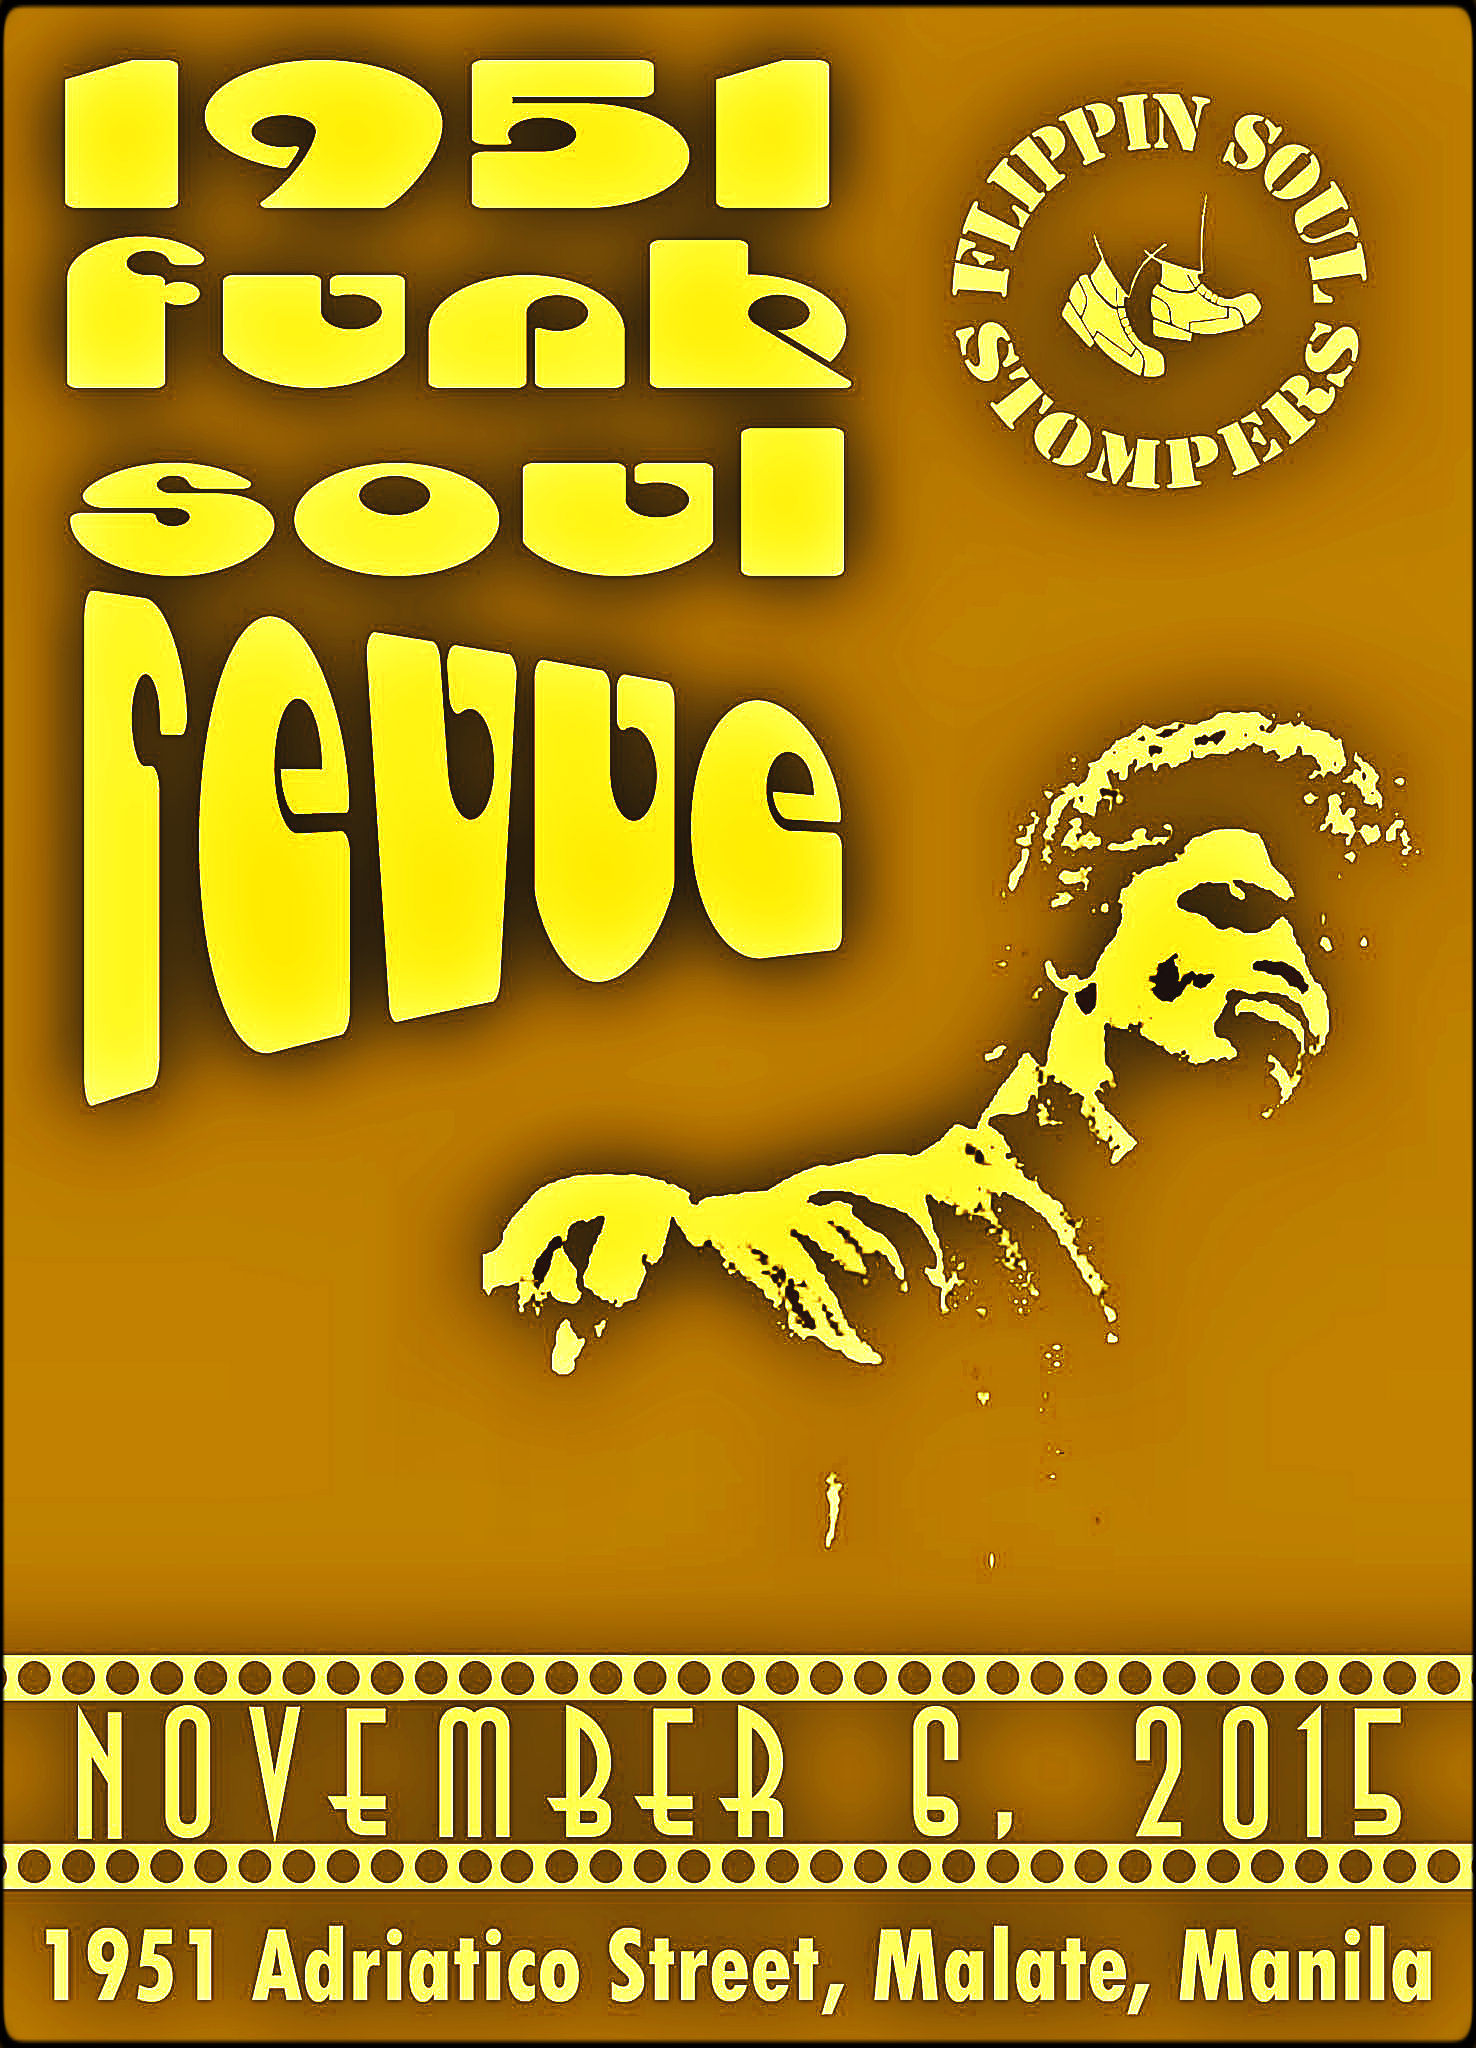 FUNK AND SOUL REVUE @ 1951 Friday, November 6 at 9:00pm 3 days from now · 90°F / 75°F Partly Cloudy Show Map Thebar@1951 1951 M. Adriatico Street Malate, 1300 Manila, Philippines Invited by Bing Austria GET READY FOR HEAVY SOUL AND FUNK FROM THE FLIPPIN SOUL STOMPERS! PARTY STARTS AT THE BAR AT 1951 AT 9PM! KEEP ON KEEPING ON!